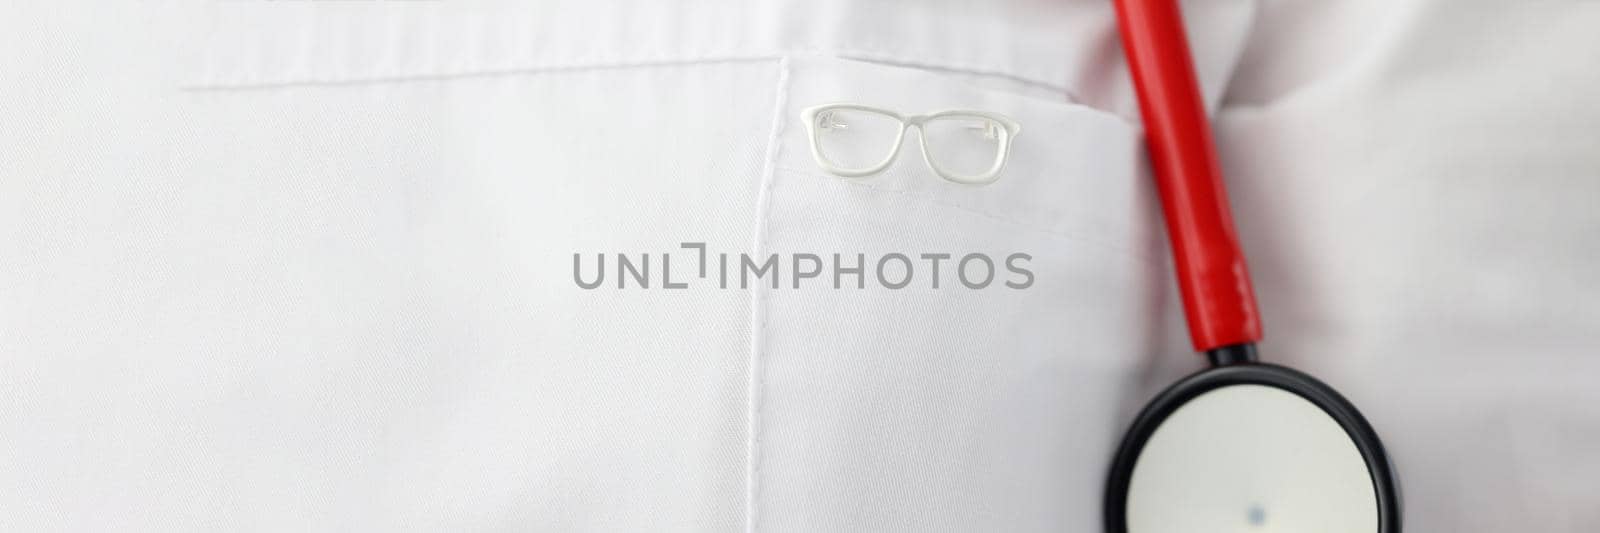 Eyeglass shape icon hanging on ophthalmologist gown closeup. Oculist profession concept